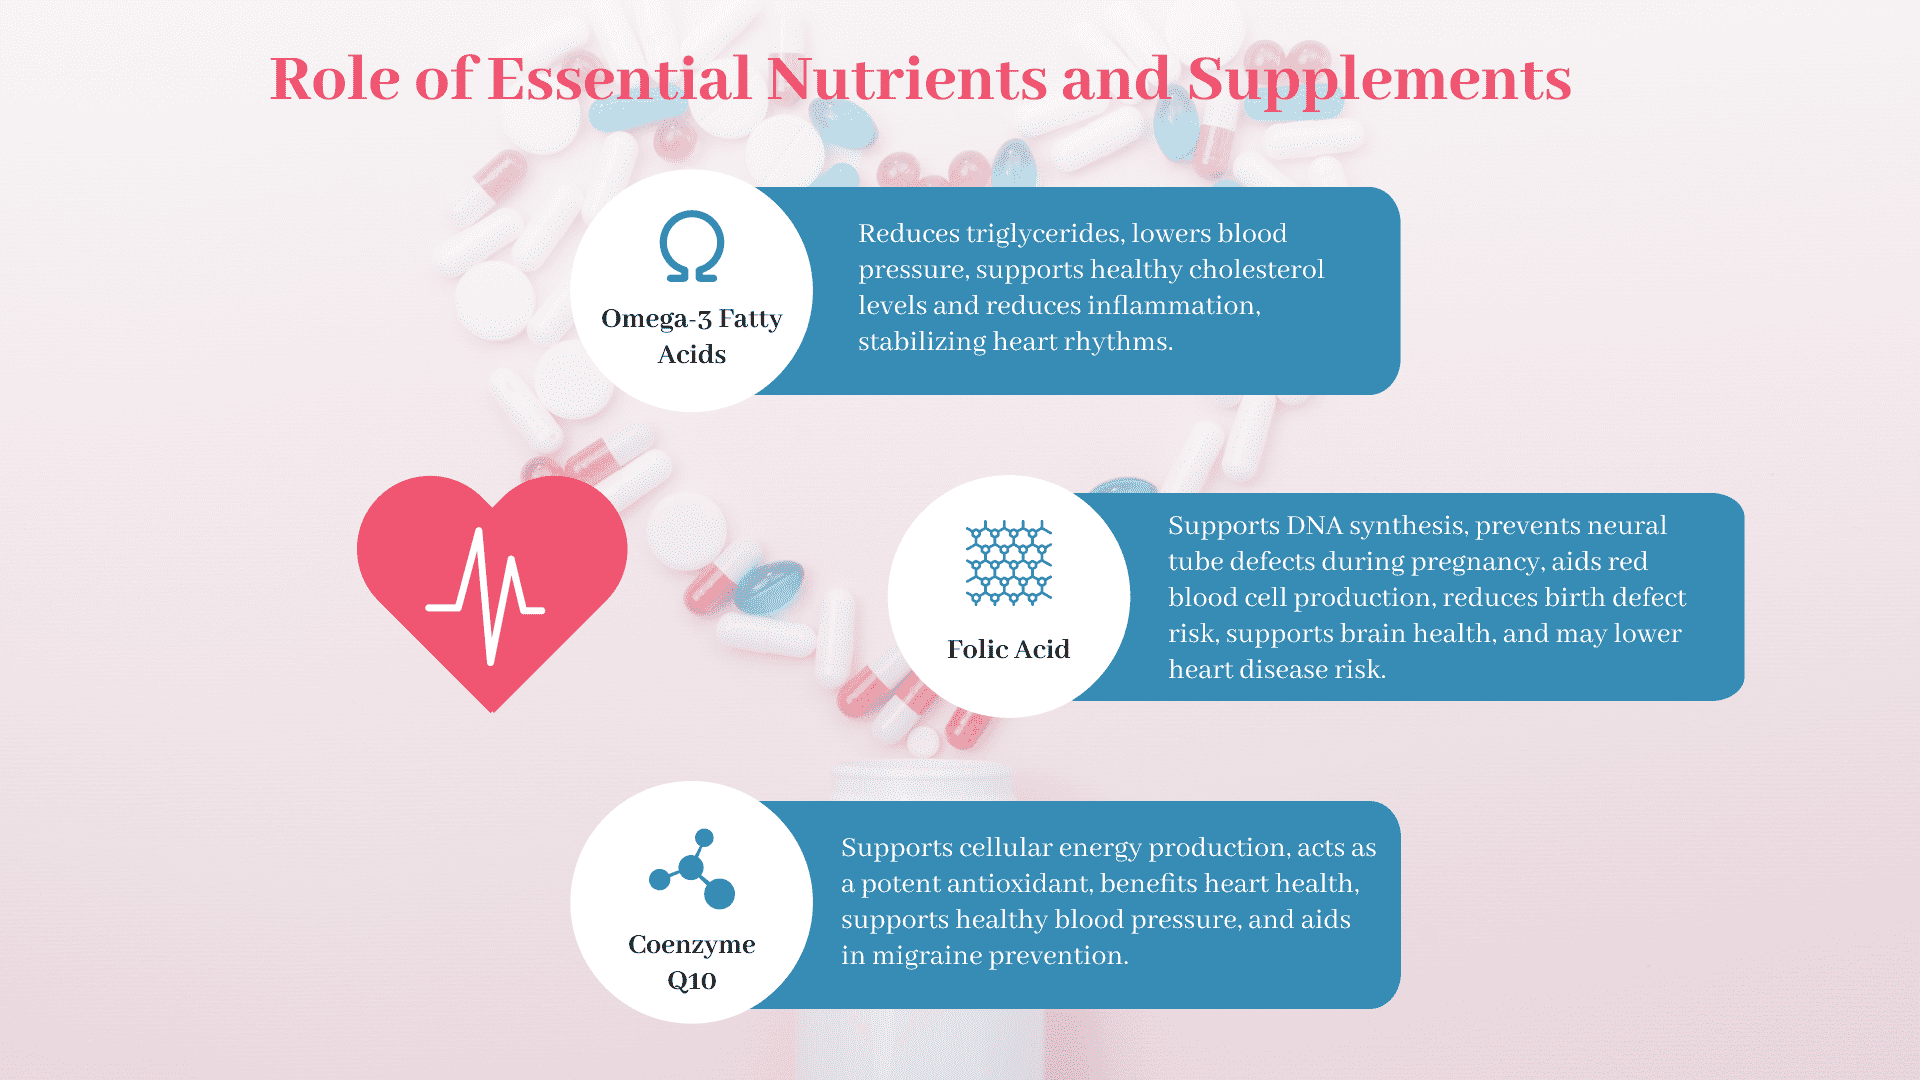 Role of Essential Nutrients and Supplements in Heart Health